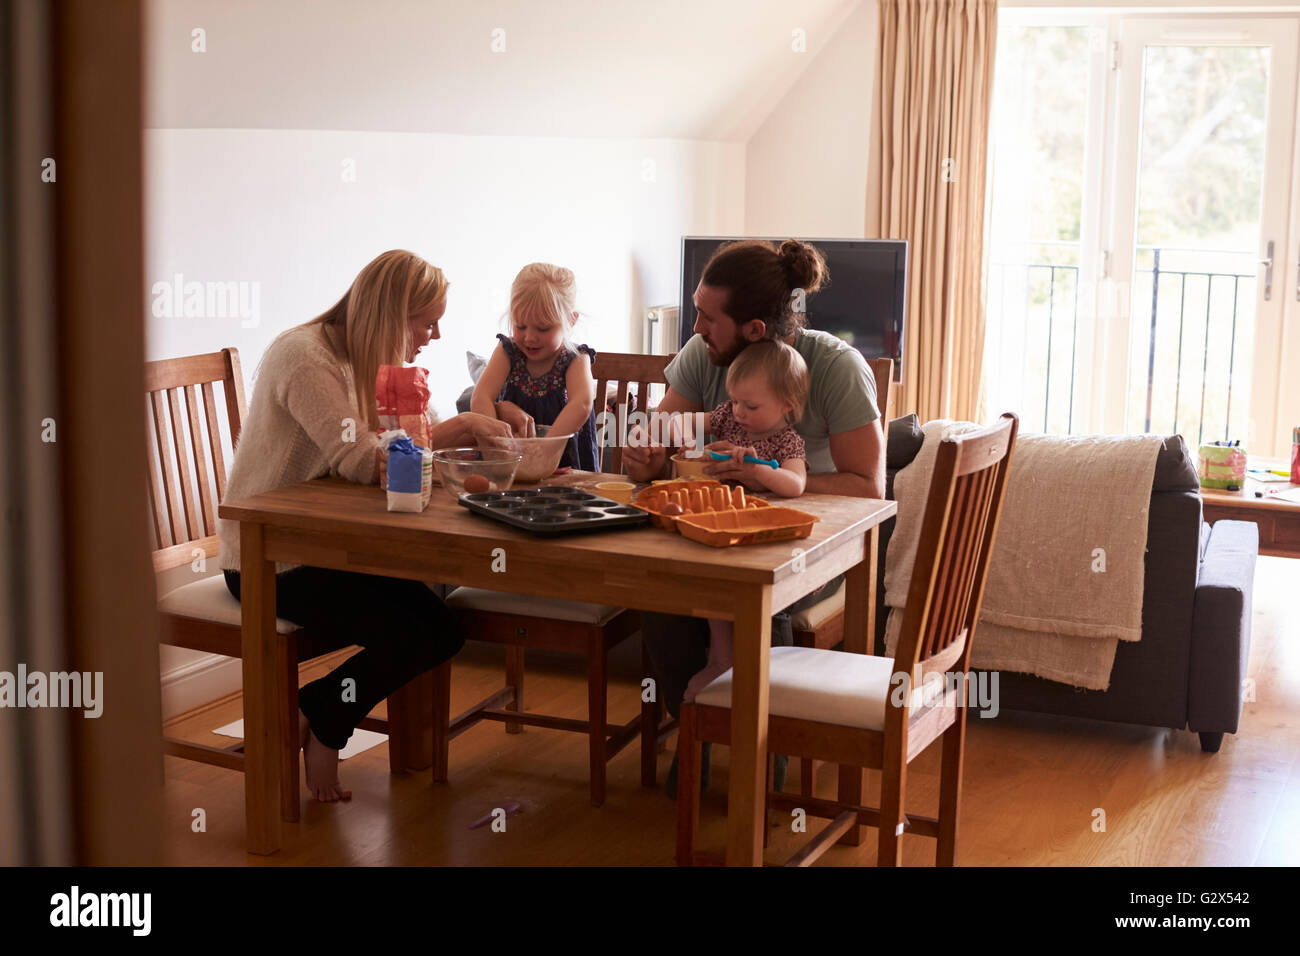 Family At Home Baking Cakes Together Stock Photo